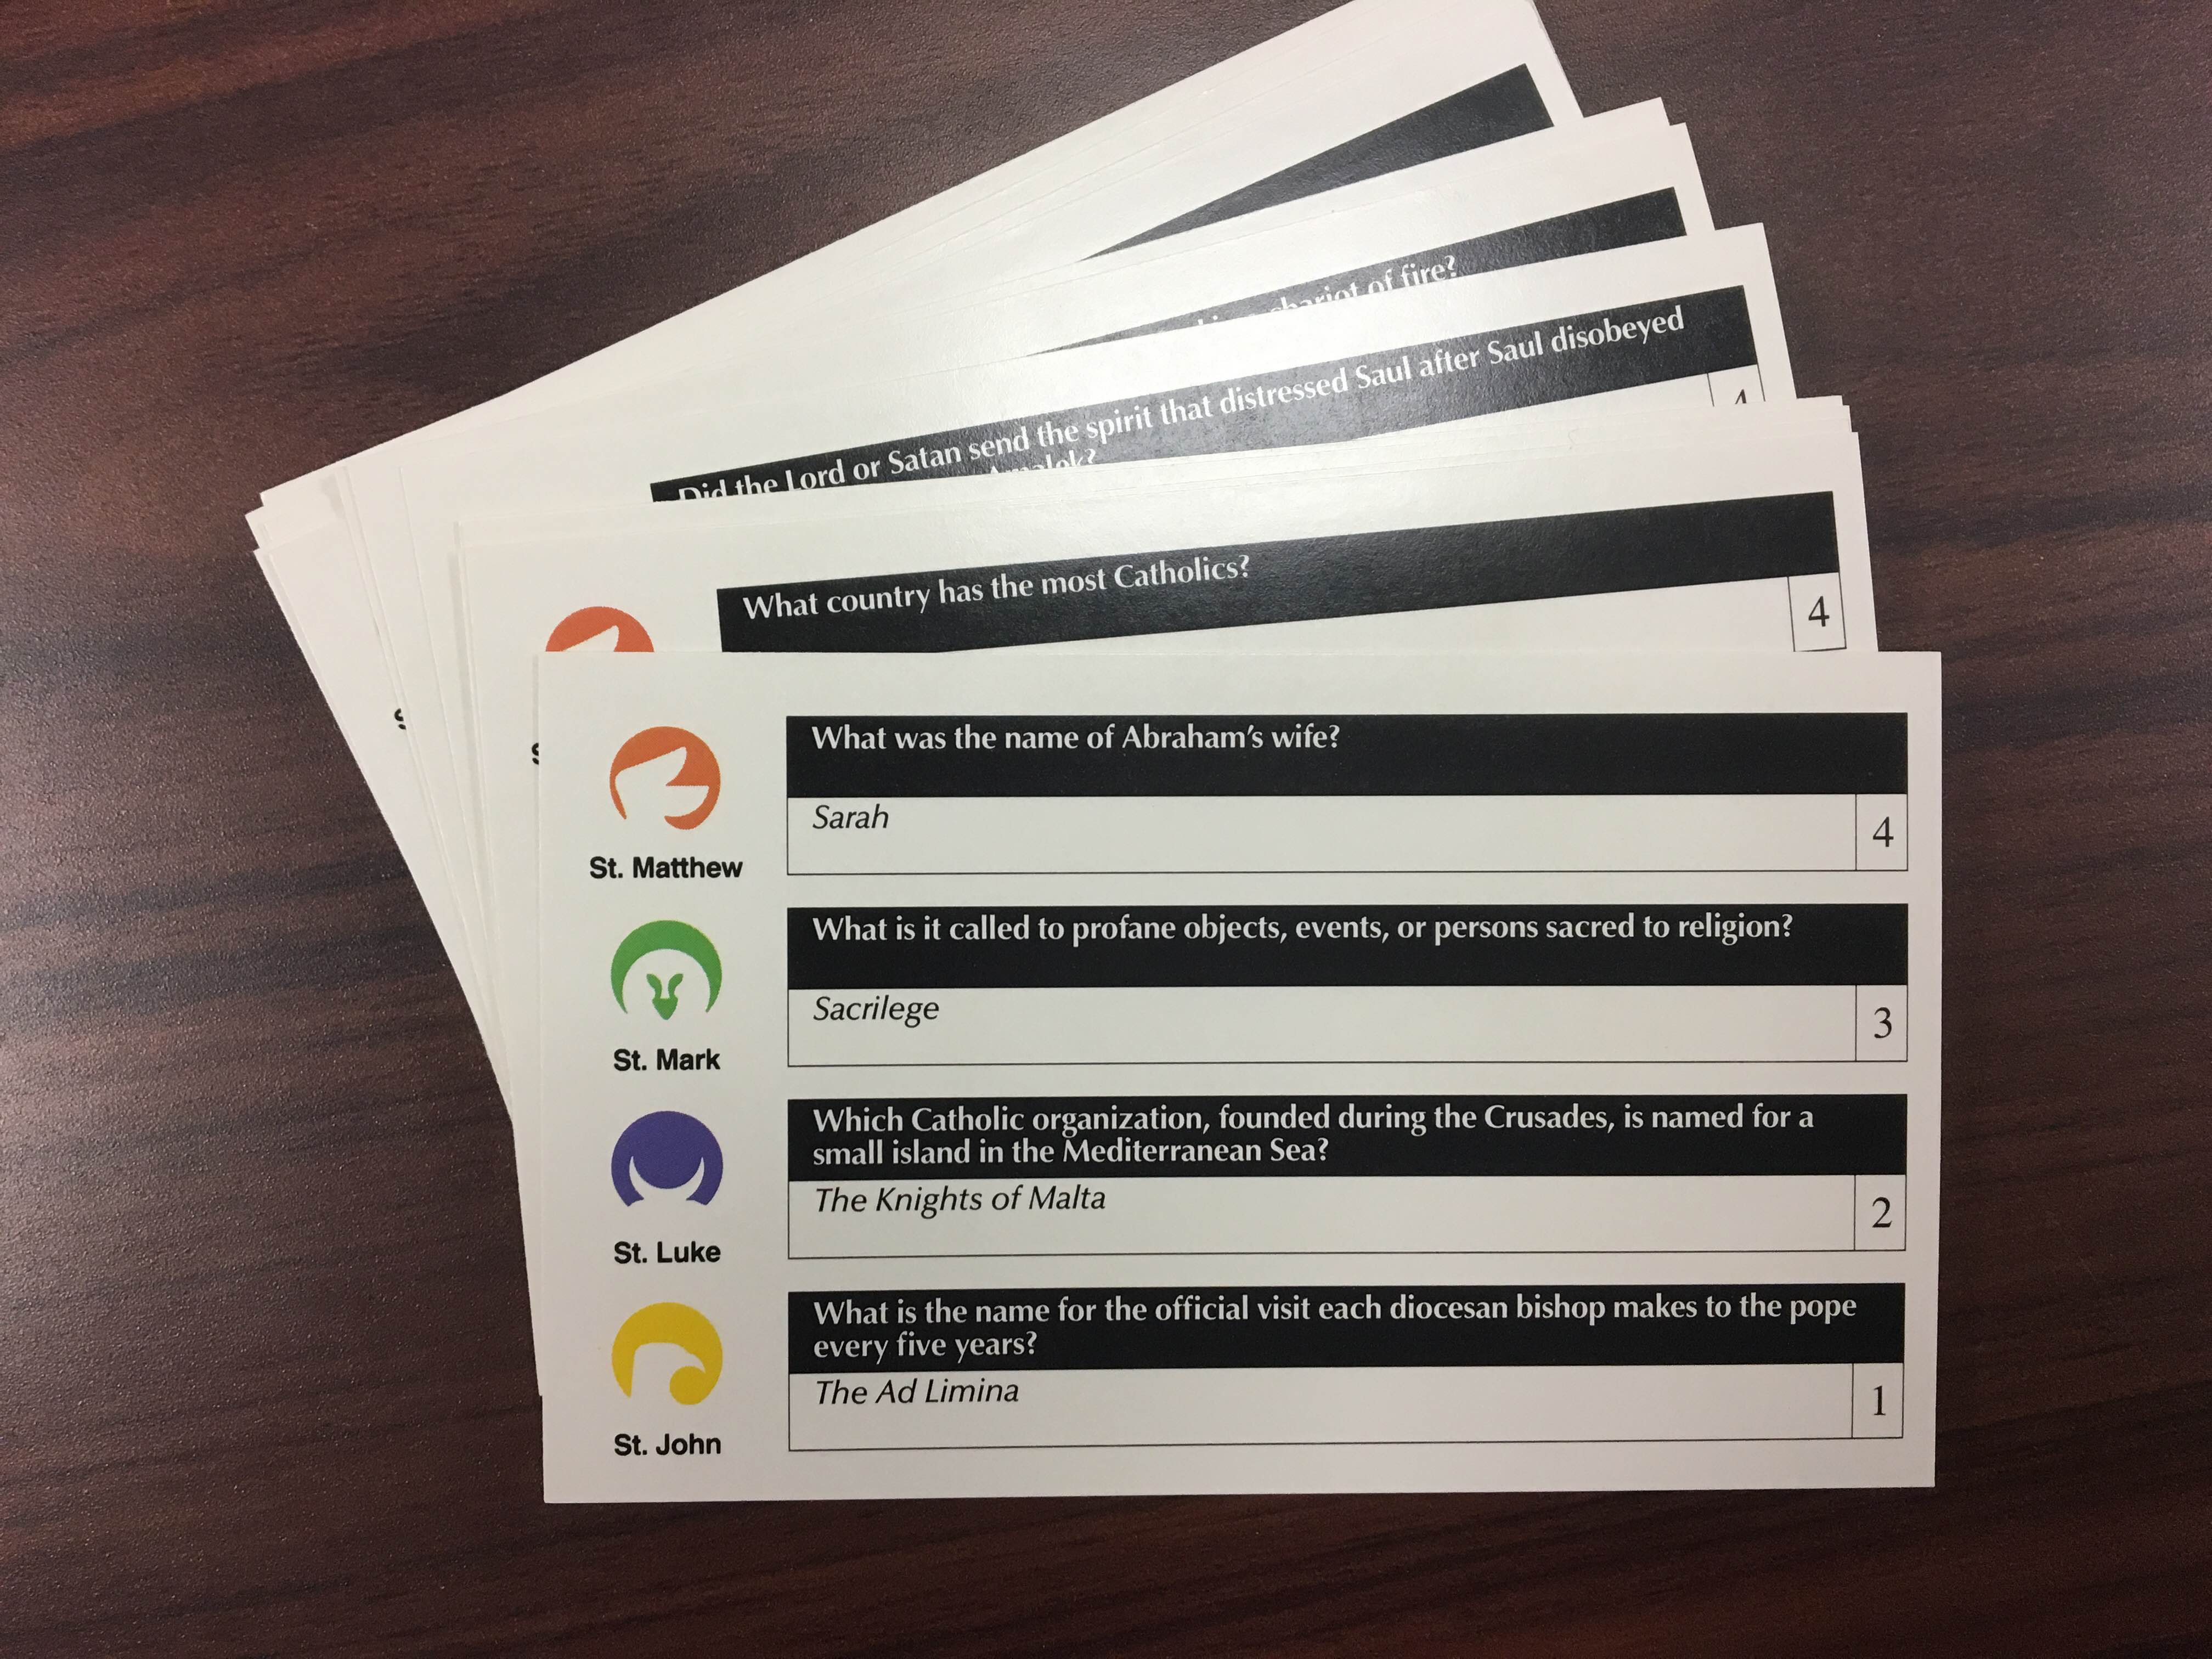 Sample trivia cards, with categories for St. Matthew, St. Mark, St. Luke, and St. John, the four evangelists.